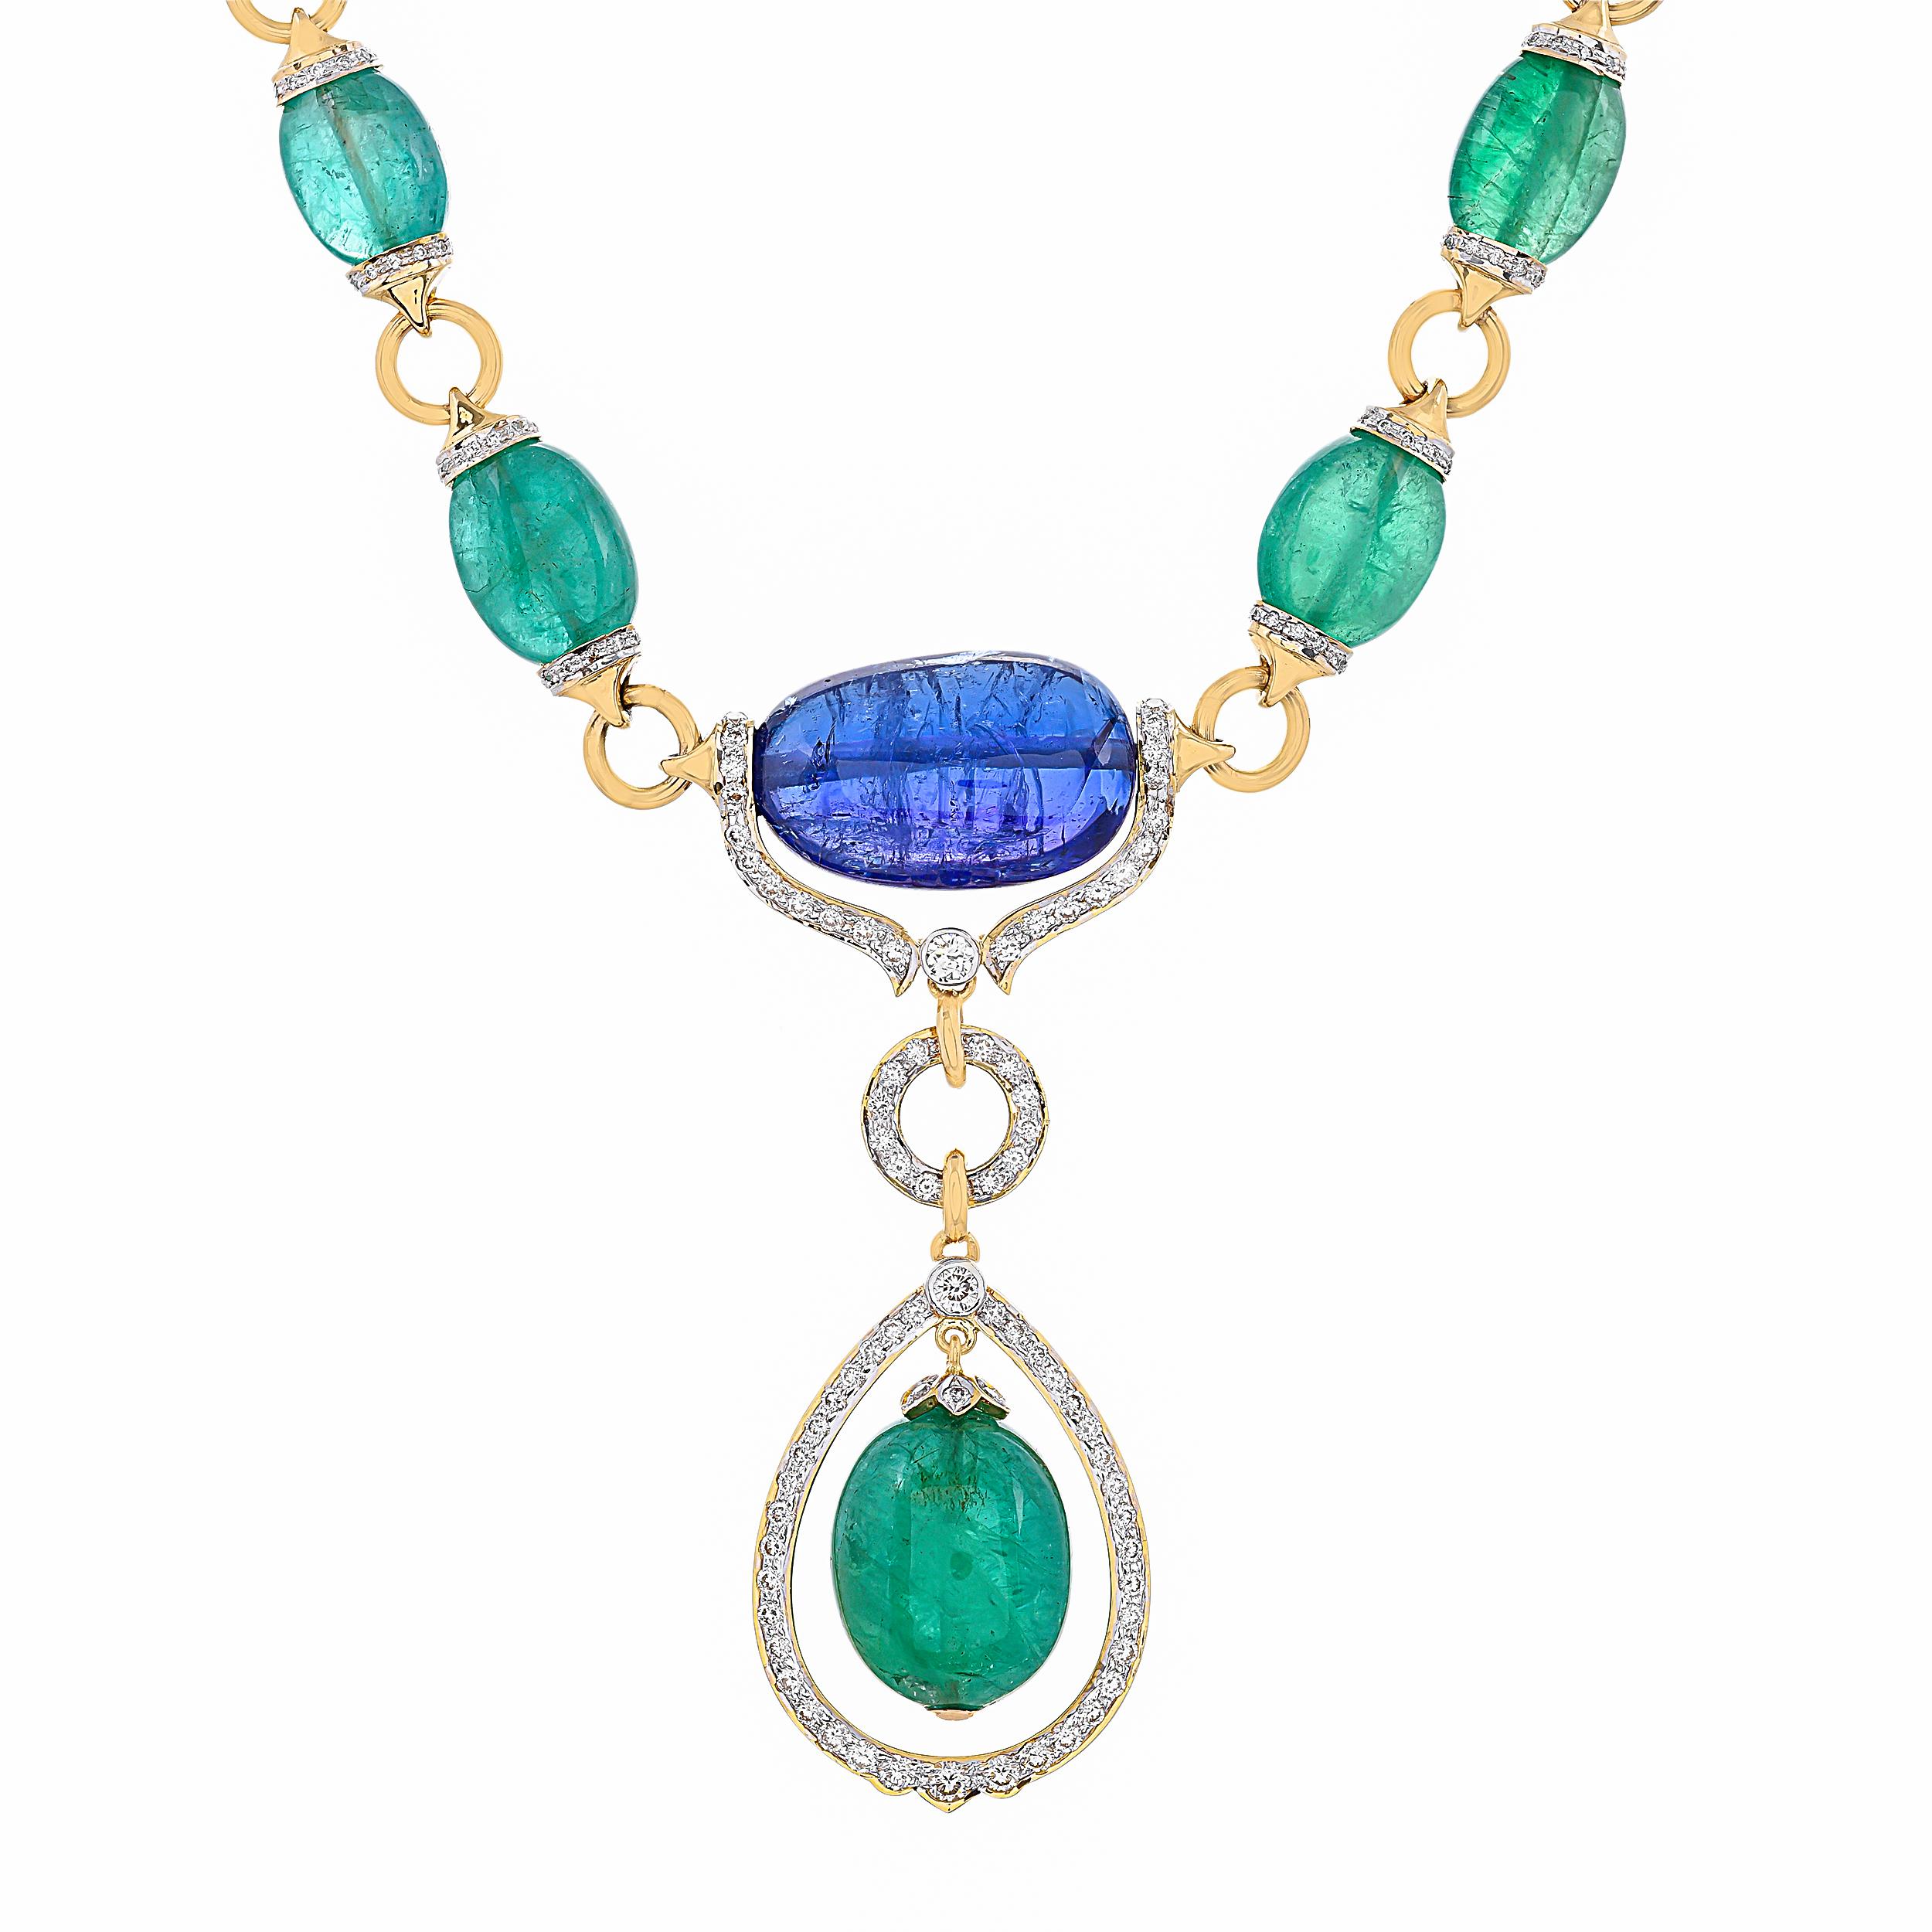 A fine definition of luxury and class, that's Benazeer for you. The limited edition necklace is in making with the breathtaking 21.07 carats Zambian Emerald tumble and stunning Tanzanite weighing approximately 30.63 carats surrounded with diamonds